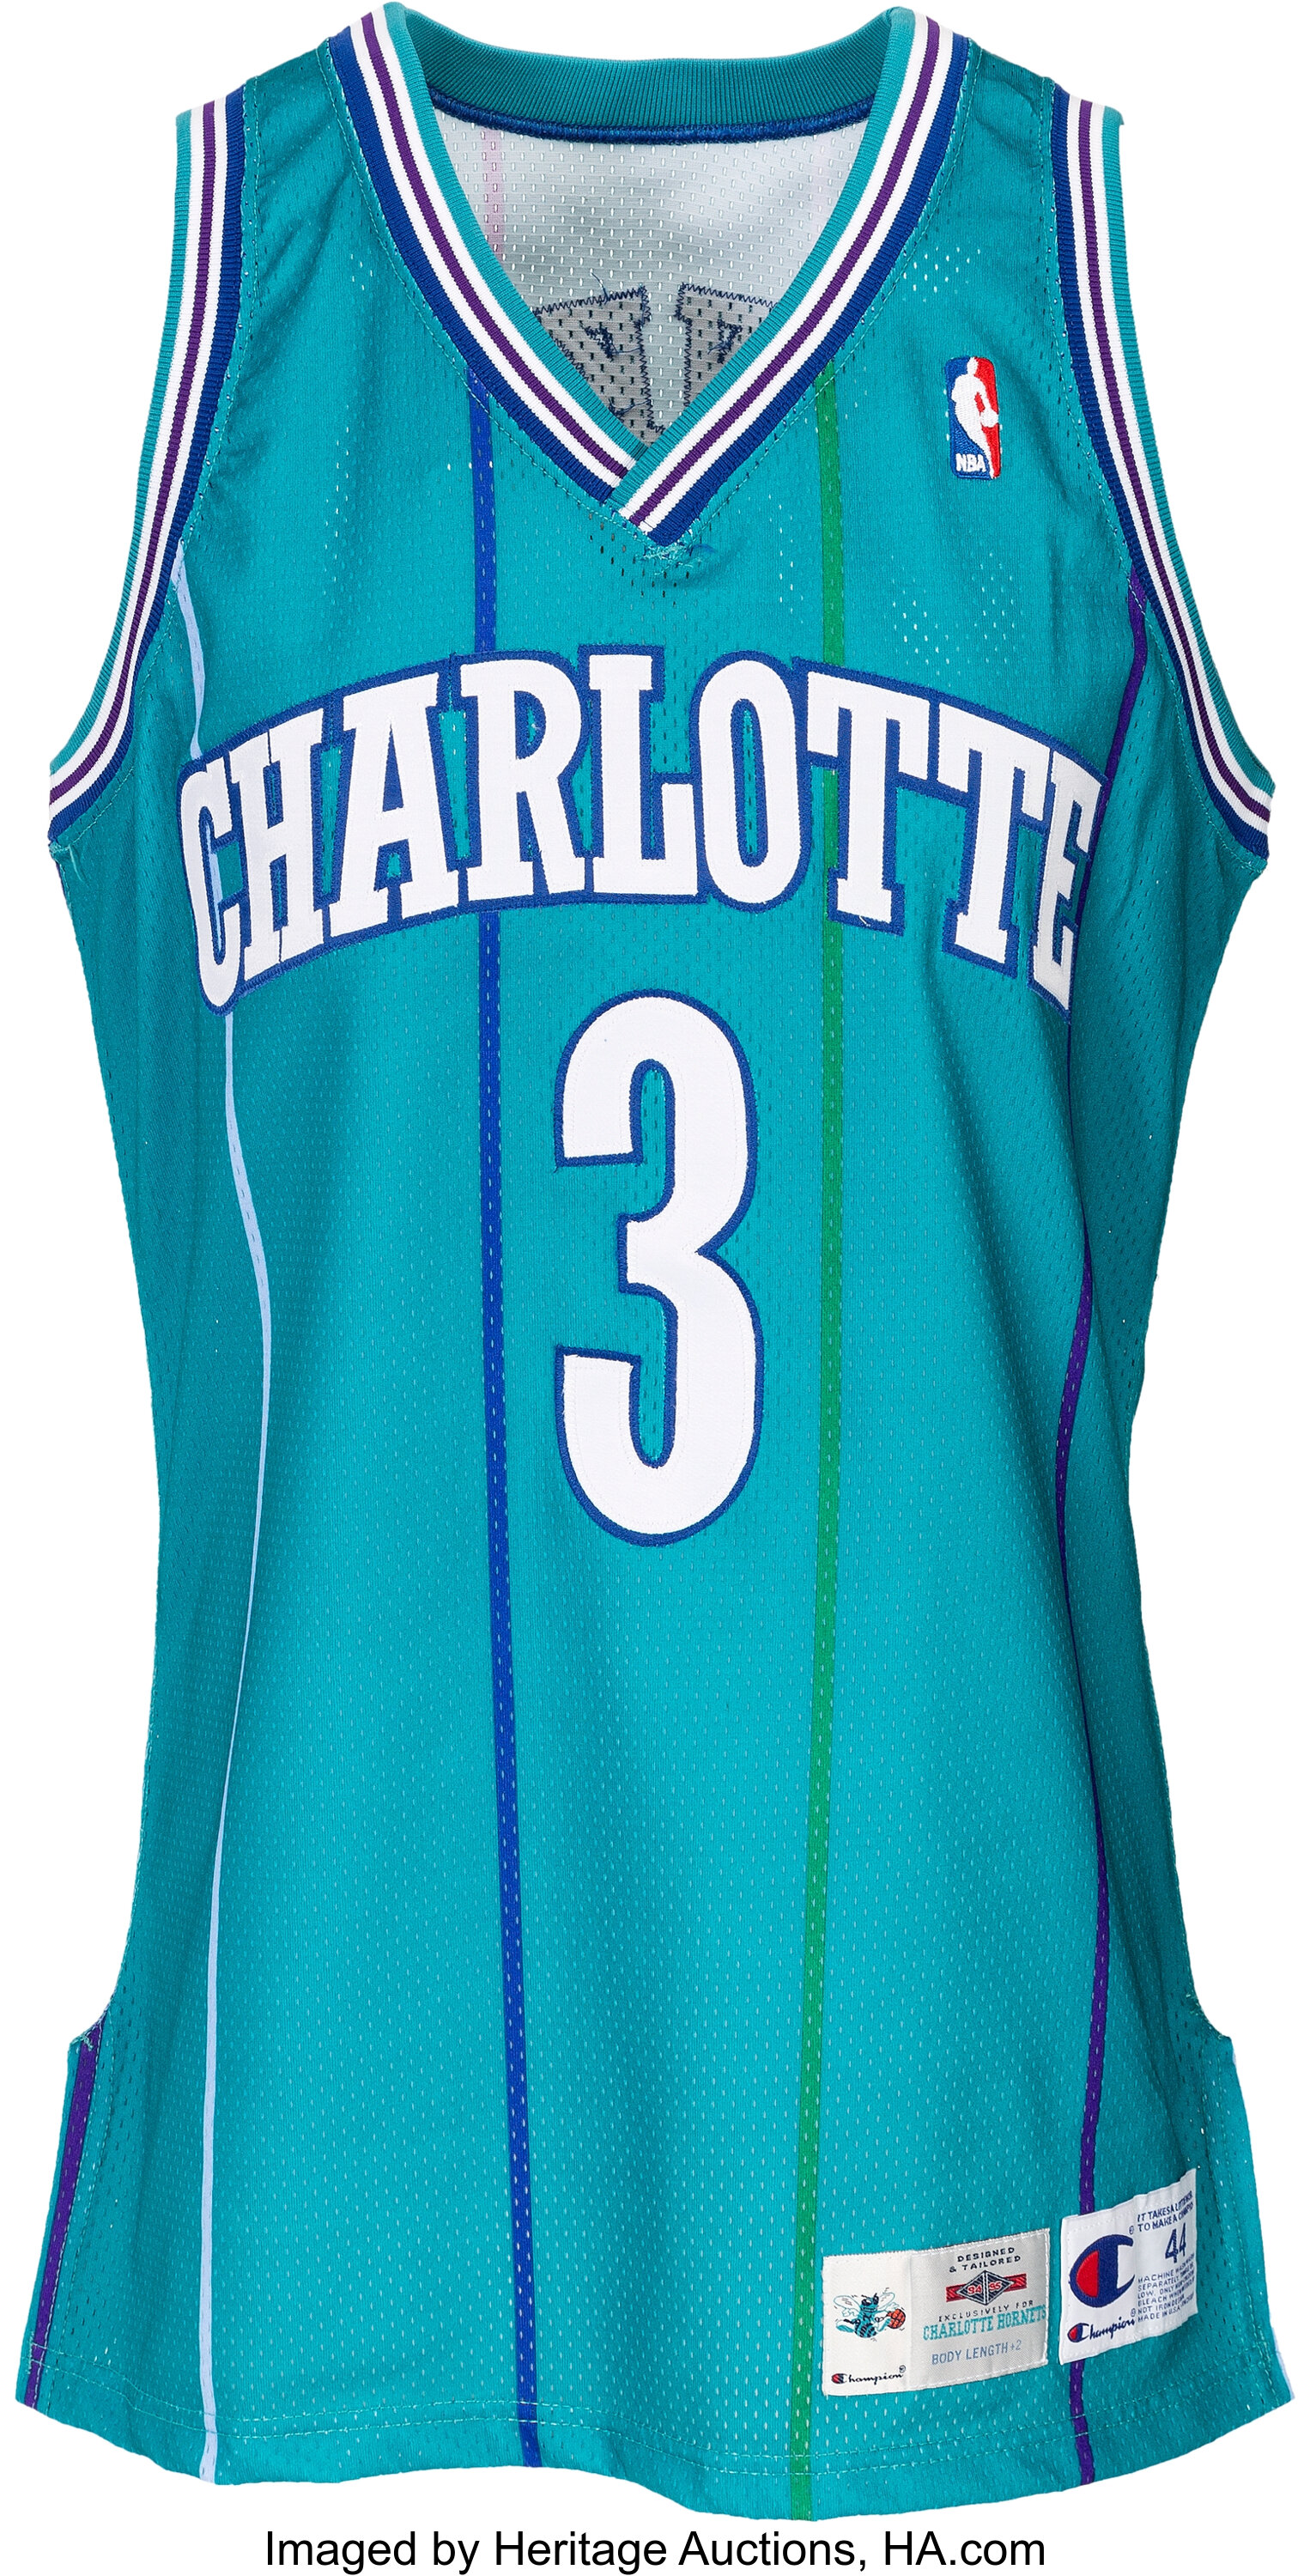 1991-93 Charlotte Hornets Game Worn Jersey and Warm Up Uniform